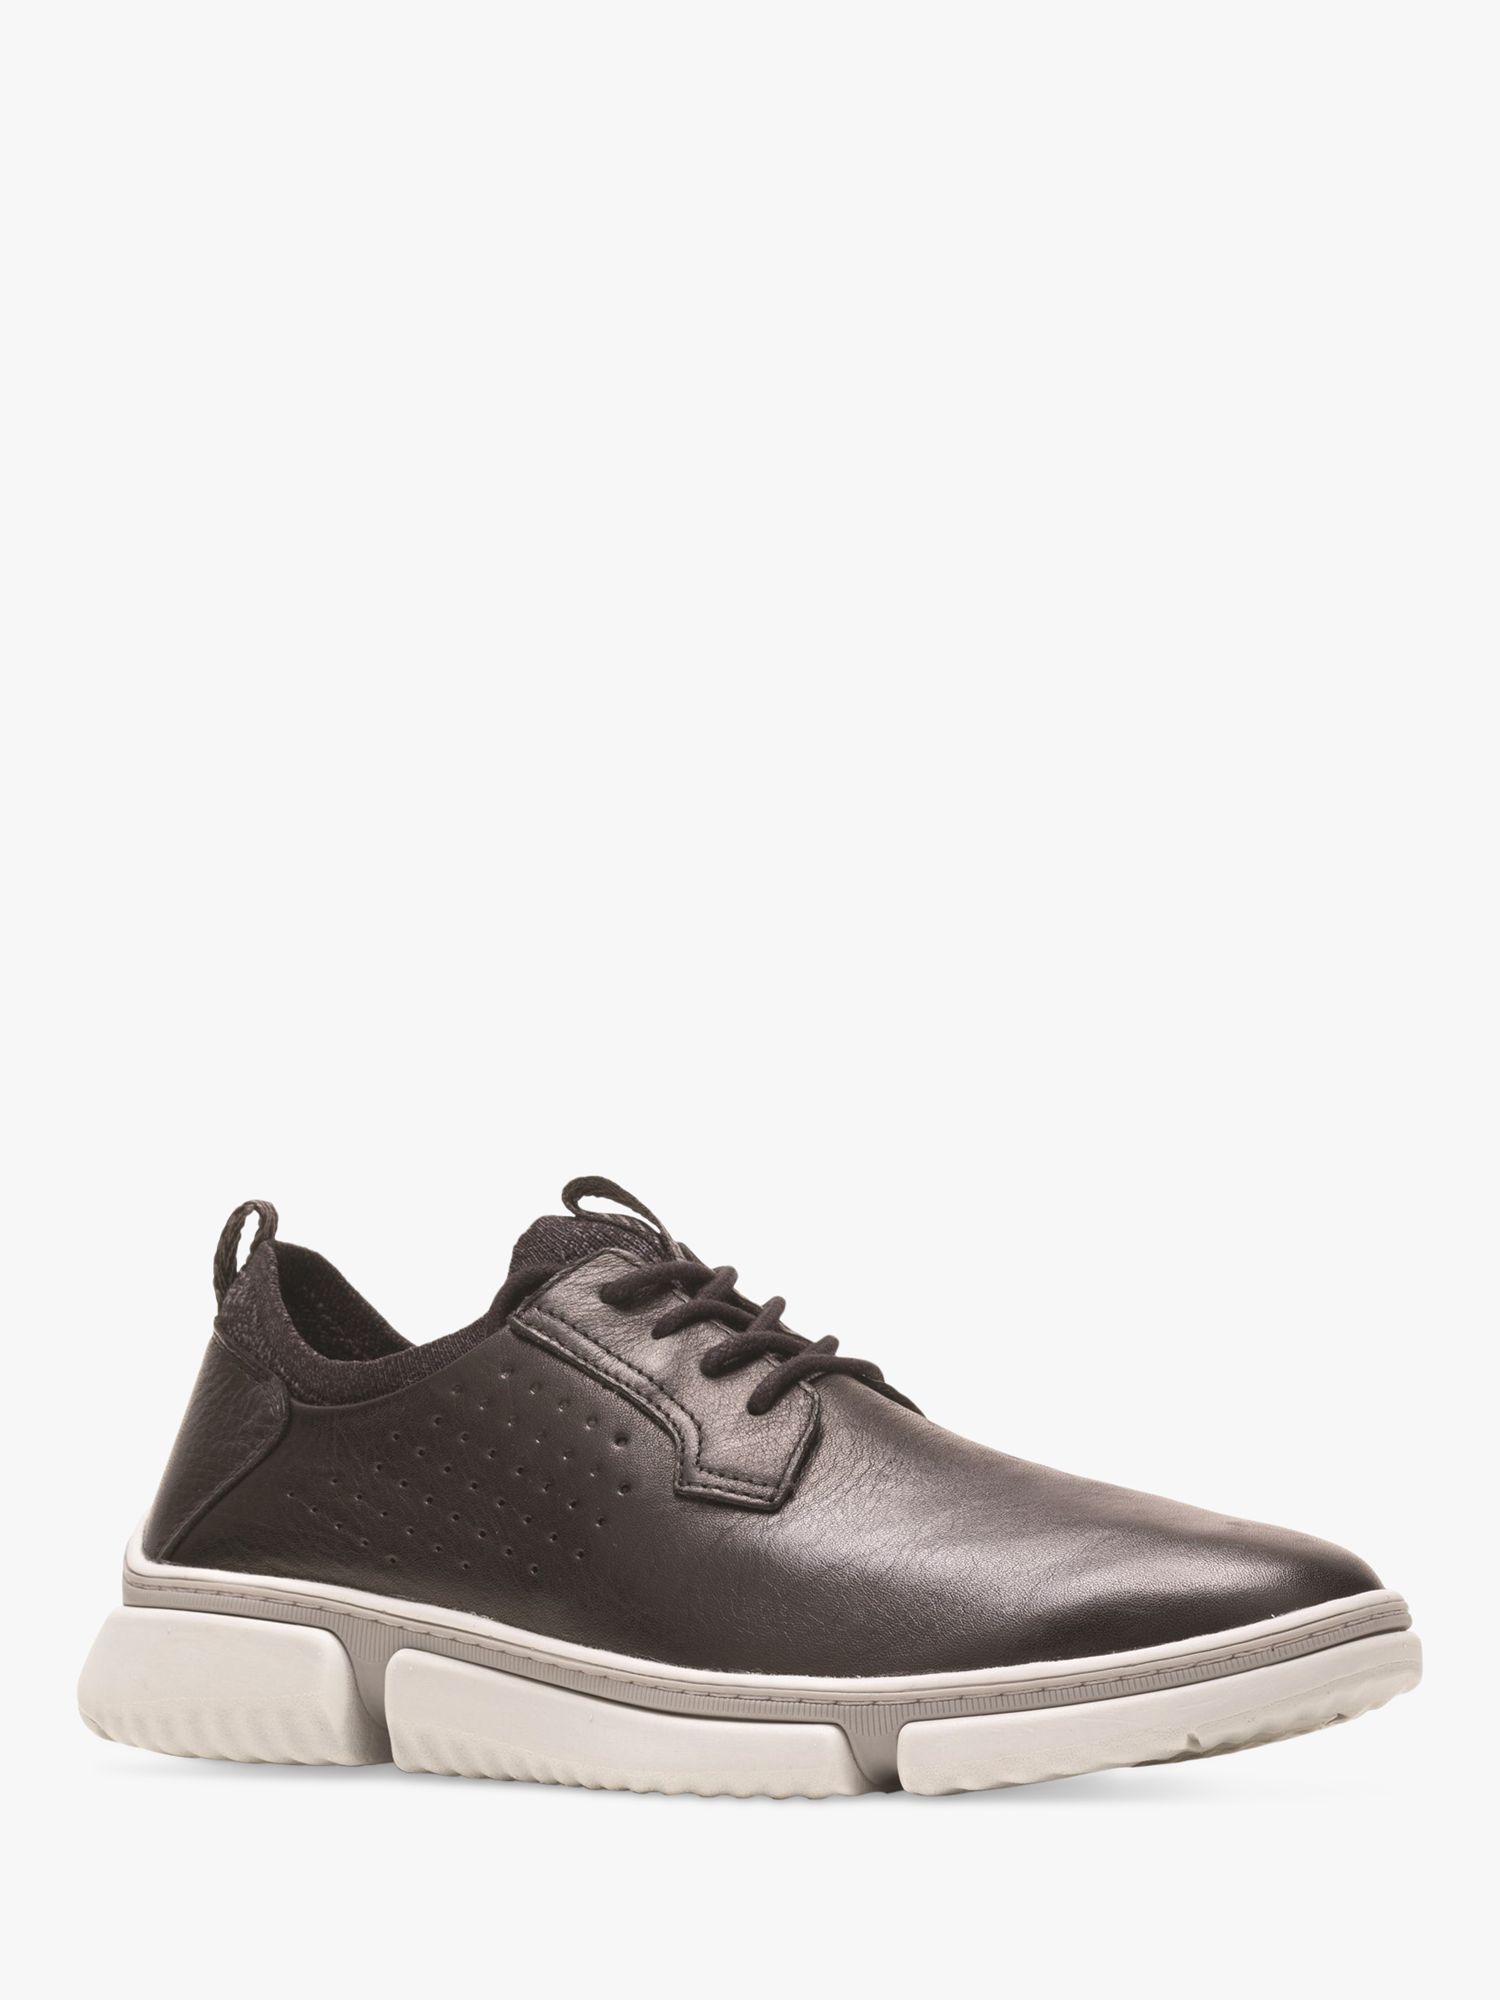 Hush Puppies Bennett Leather Lace Up Oxford Shoes, Black at John Lewis ...